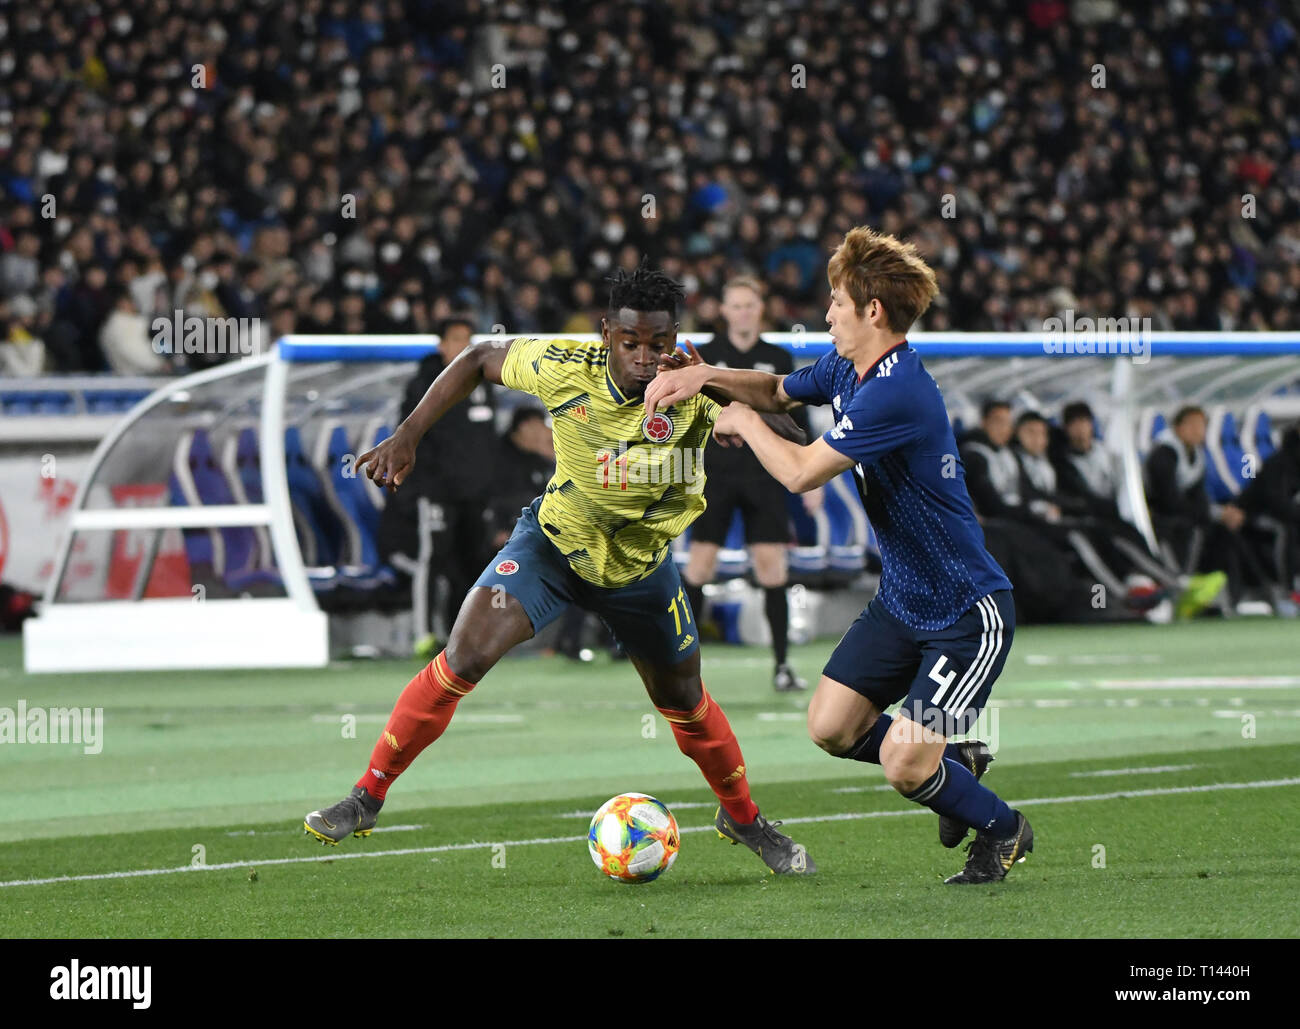 Tokyo, Japan. 22nd Mar, 2019. D. Zapata of Colombia fights for the ball  with Sazaki of Japan during the Kirin Challenge Cup 2019 between Colombia  and Japan at the International Yokohama Stadium